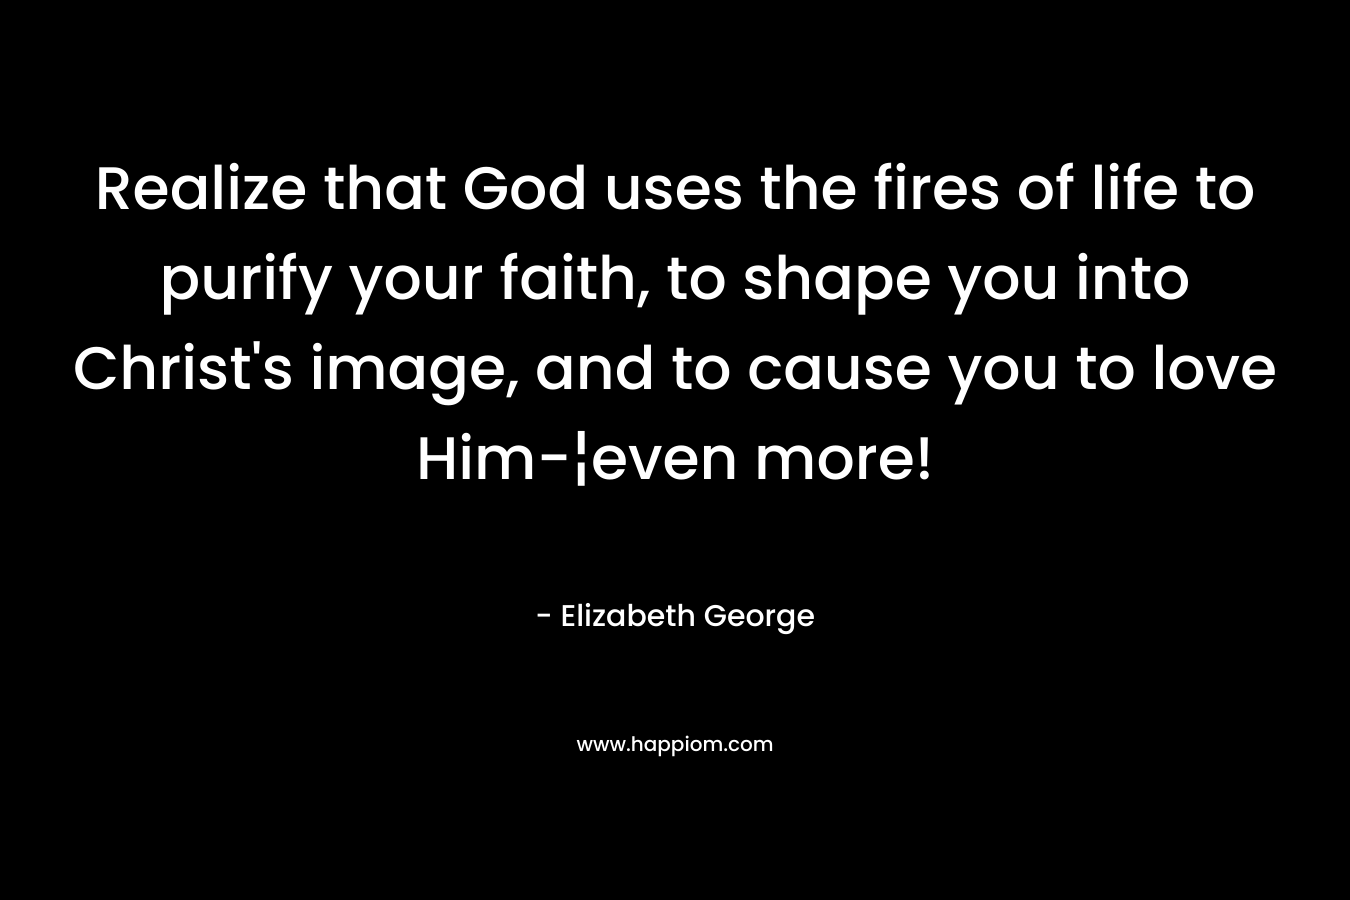 Realize that God uses the fires of life to purify your faith, to shape you into Christ's image, and to cause you to love Him-¦even more!